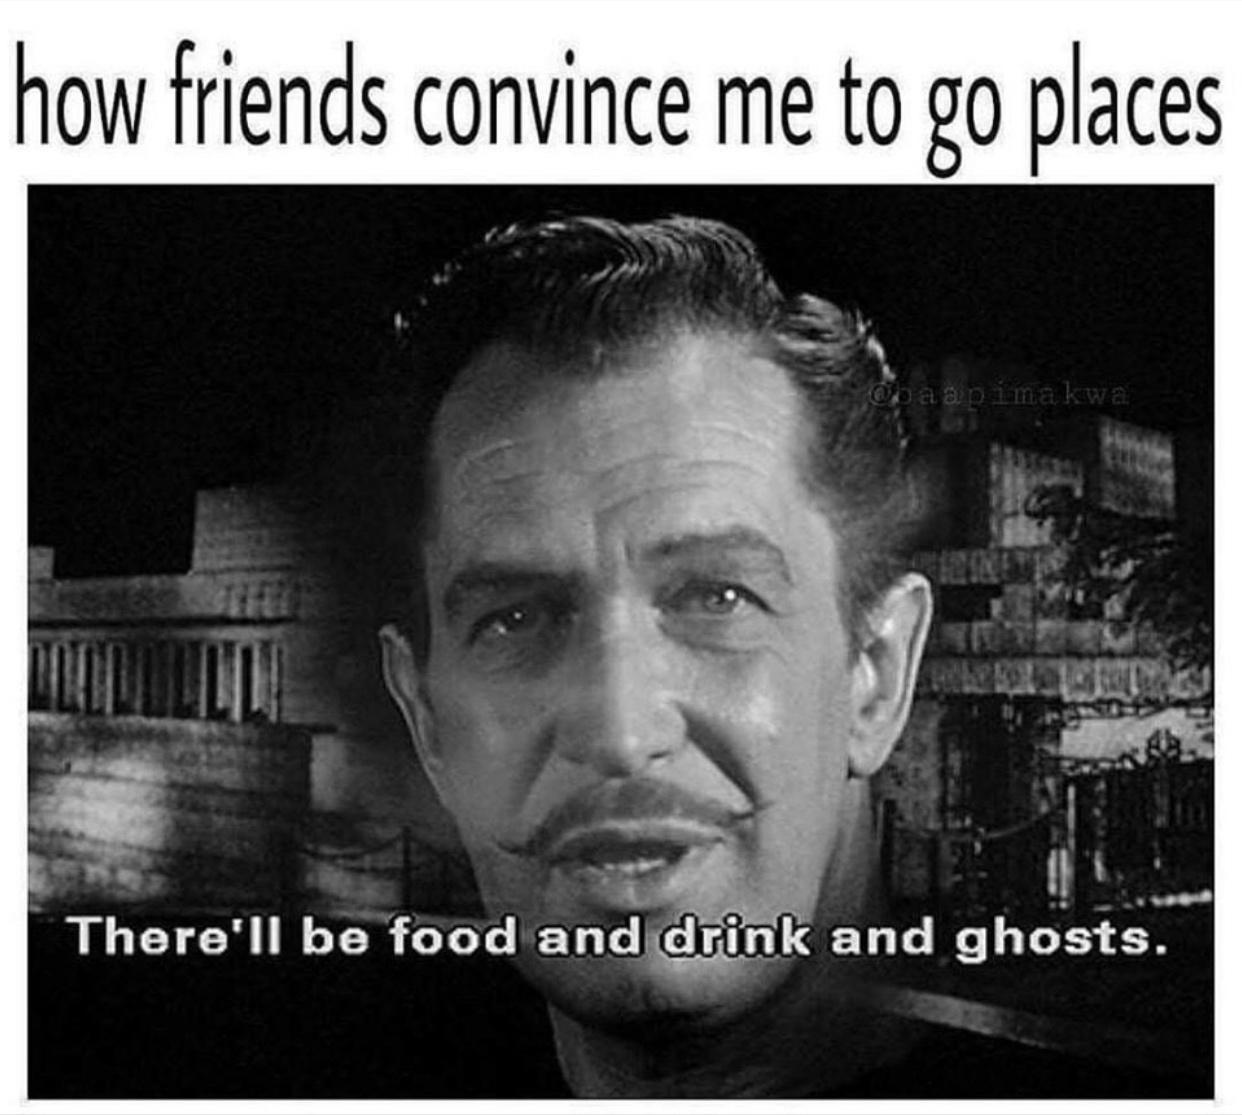 dank memes - house on haunted hill 1959 - how friends convince me to go places obaap ina kwa There'll be food and drink and ghosts.